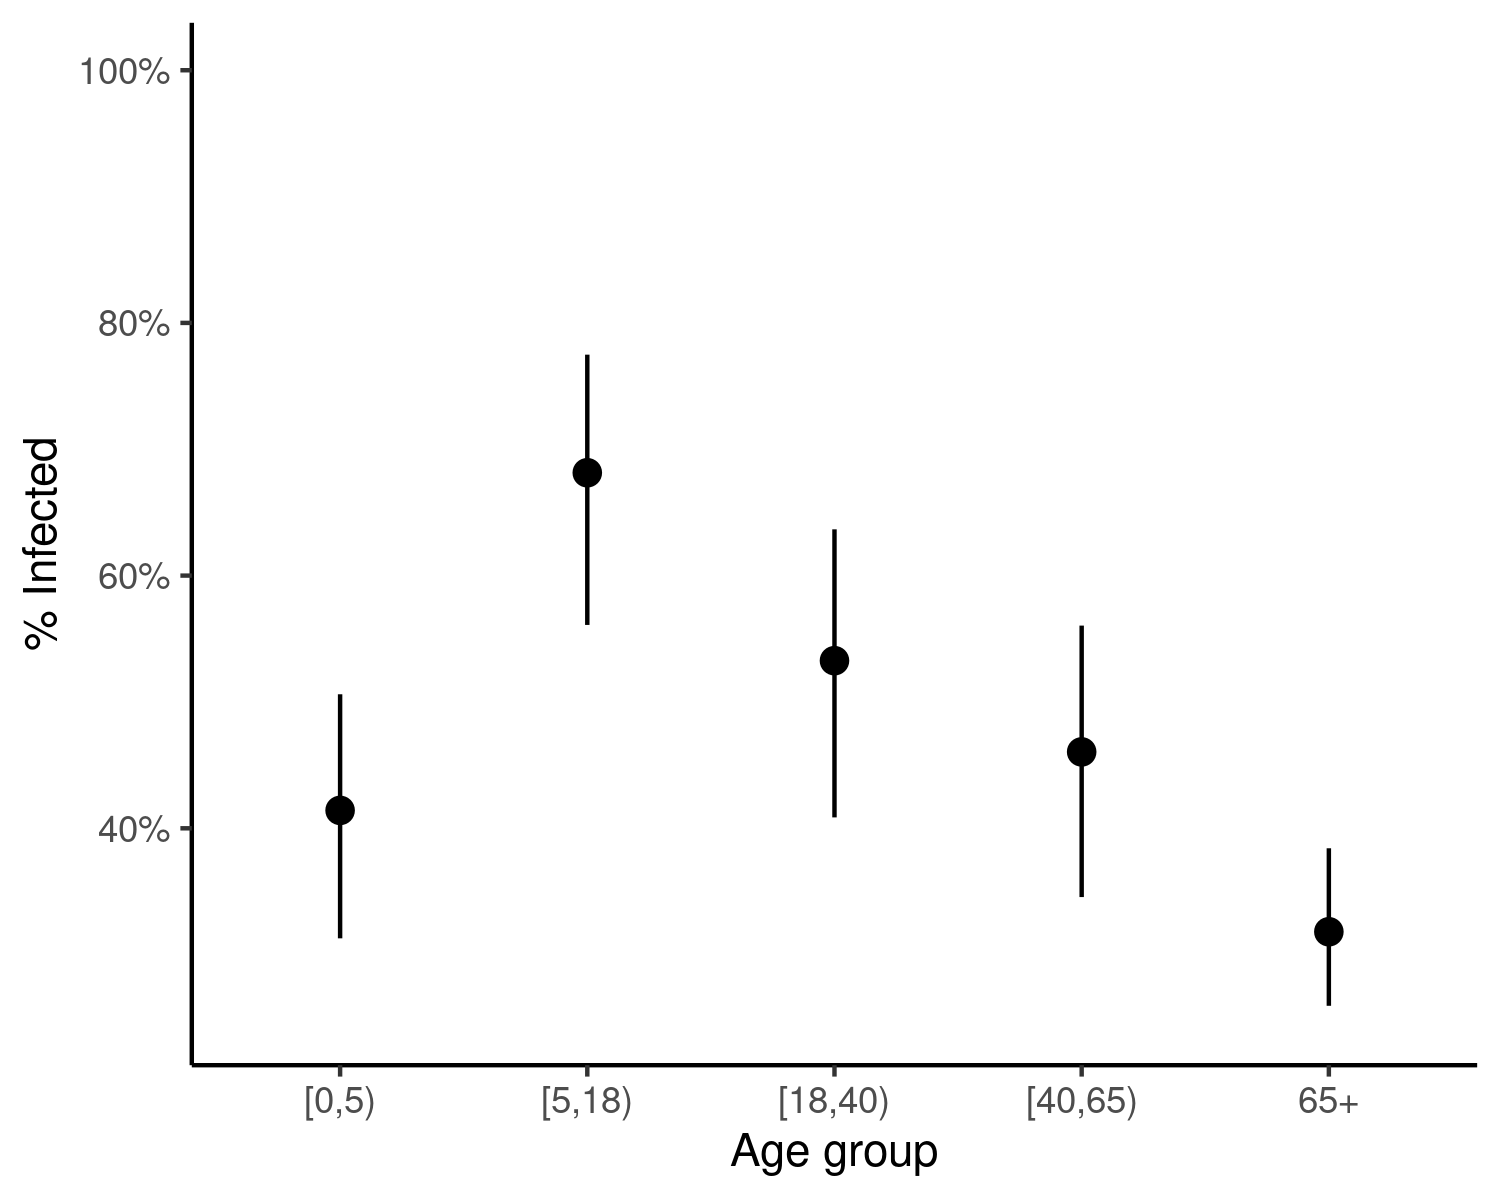 Estimated ranges of the final size of a hypothetical SIR epidemic in age groups of the U.K. population, when the $R_0$ is estimated to be 1.5, with a standard deviation around this estimate of 0.1. In this example, relatively low uncertainty in $R_0$ estimates can also lead to uncertainty in the estimated final size of the epidemic. Points represent means, while ranges extend between the 5th and 95th percentiles.